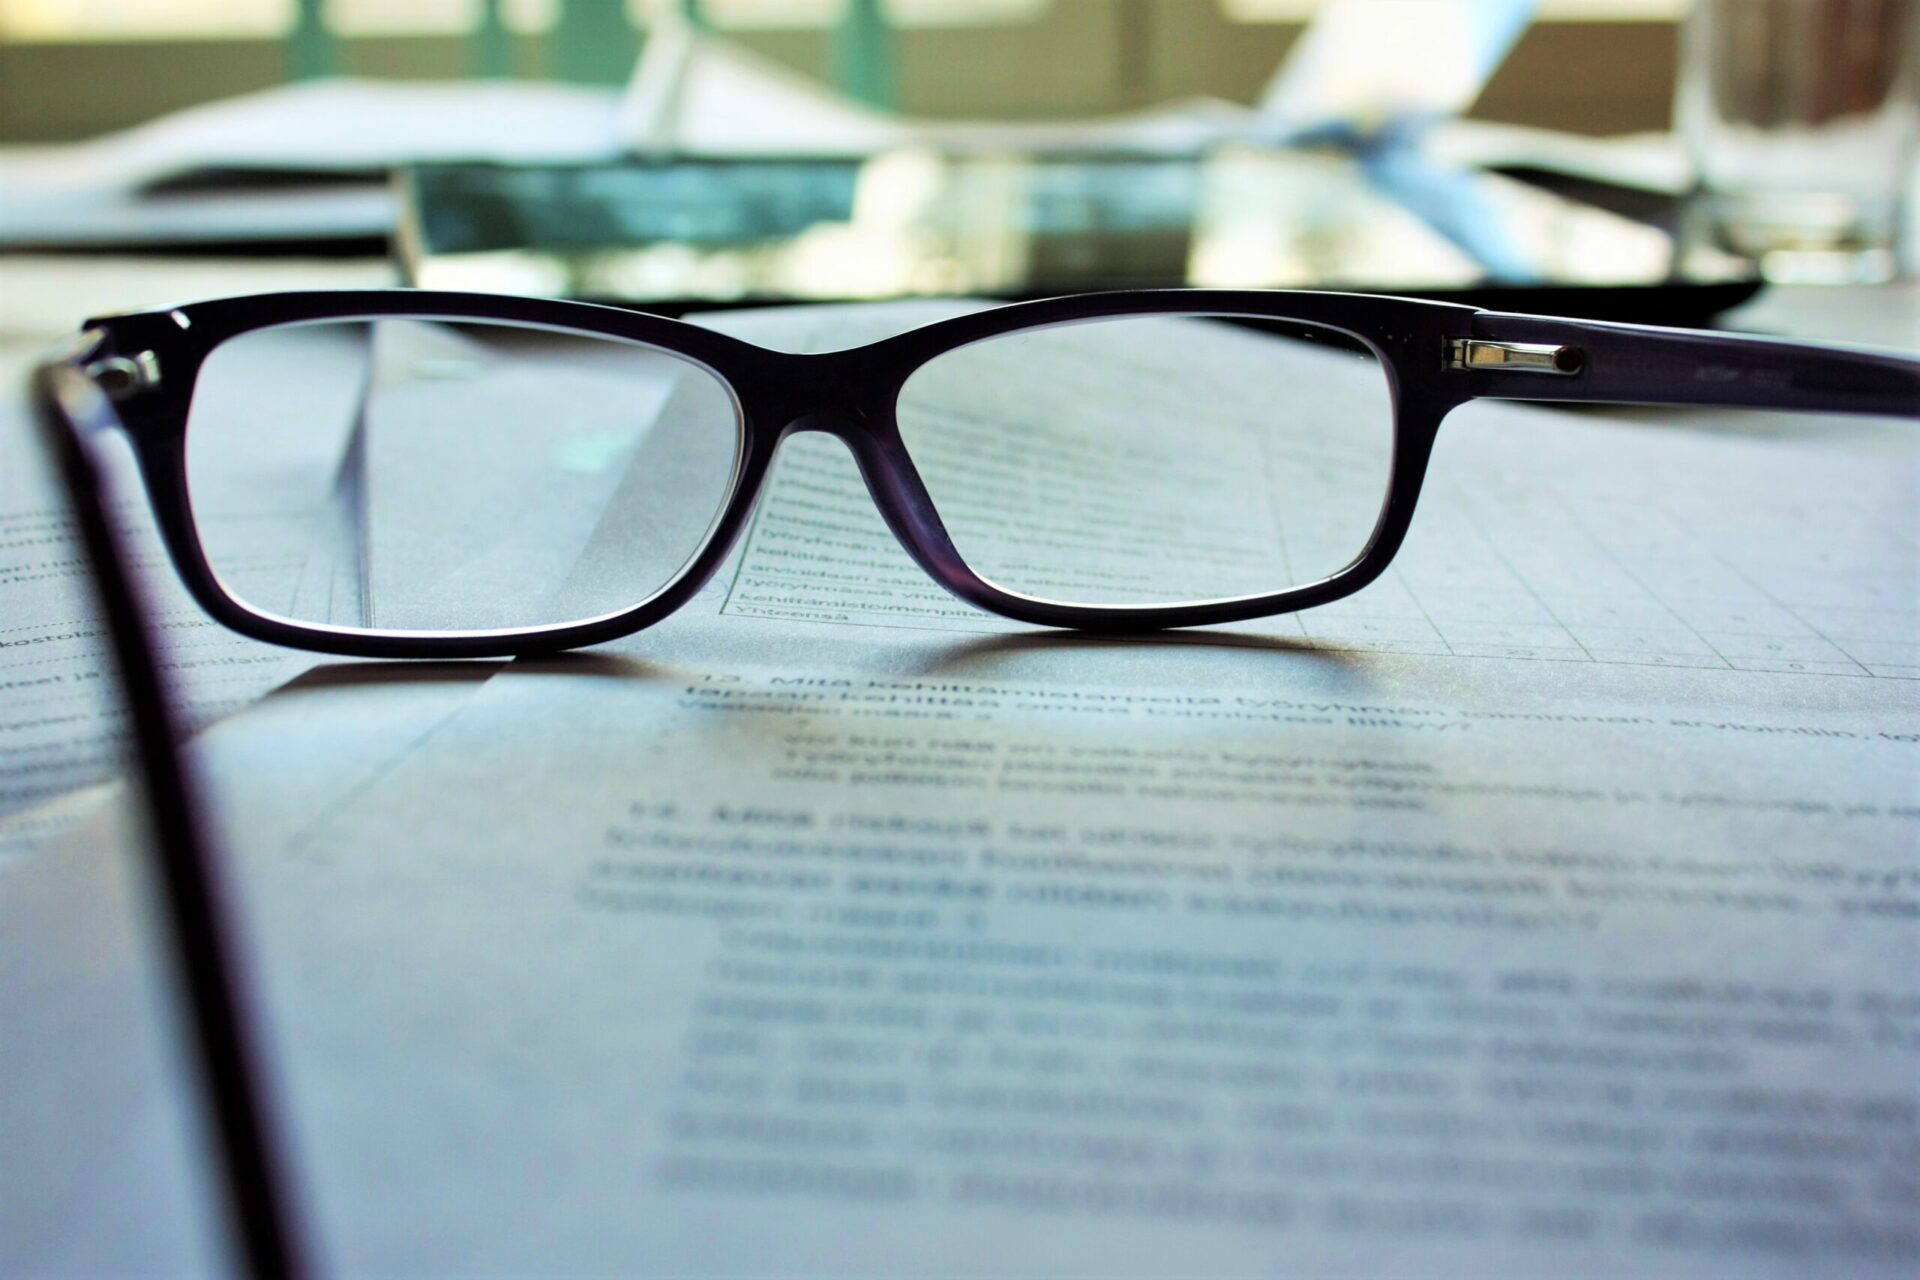 Glasses laying on documents